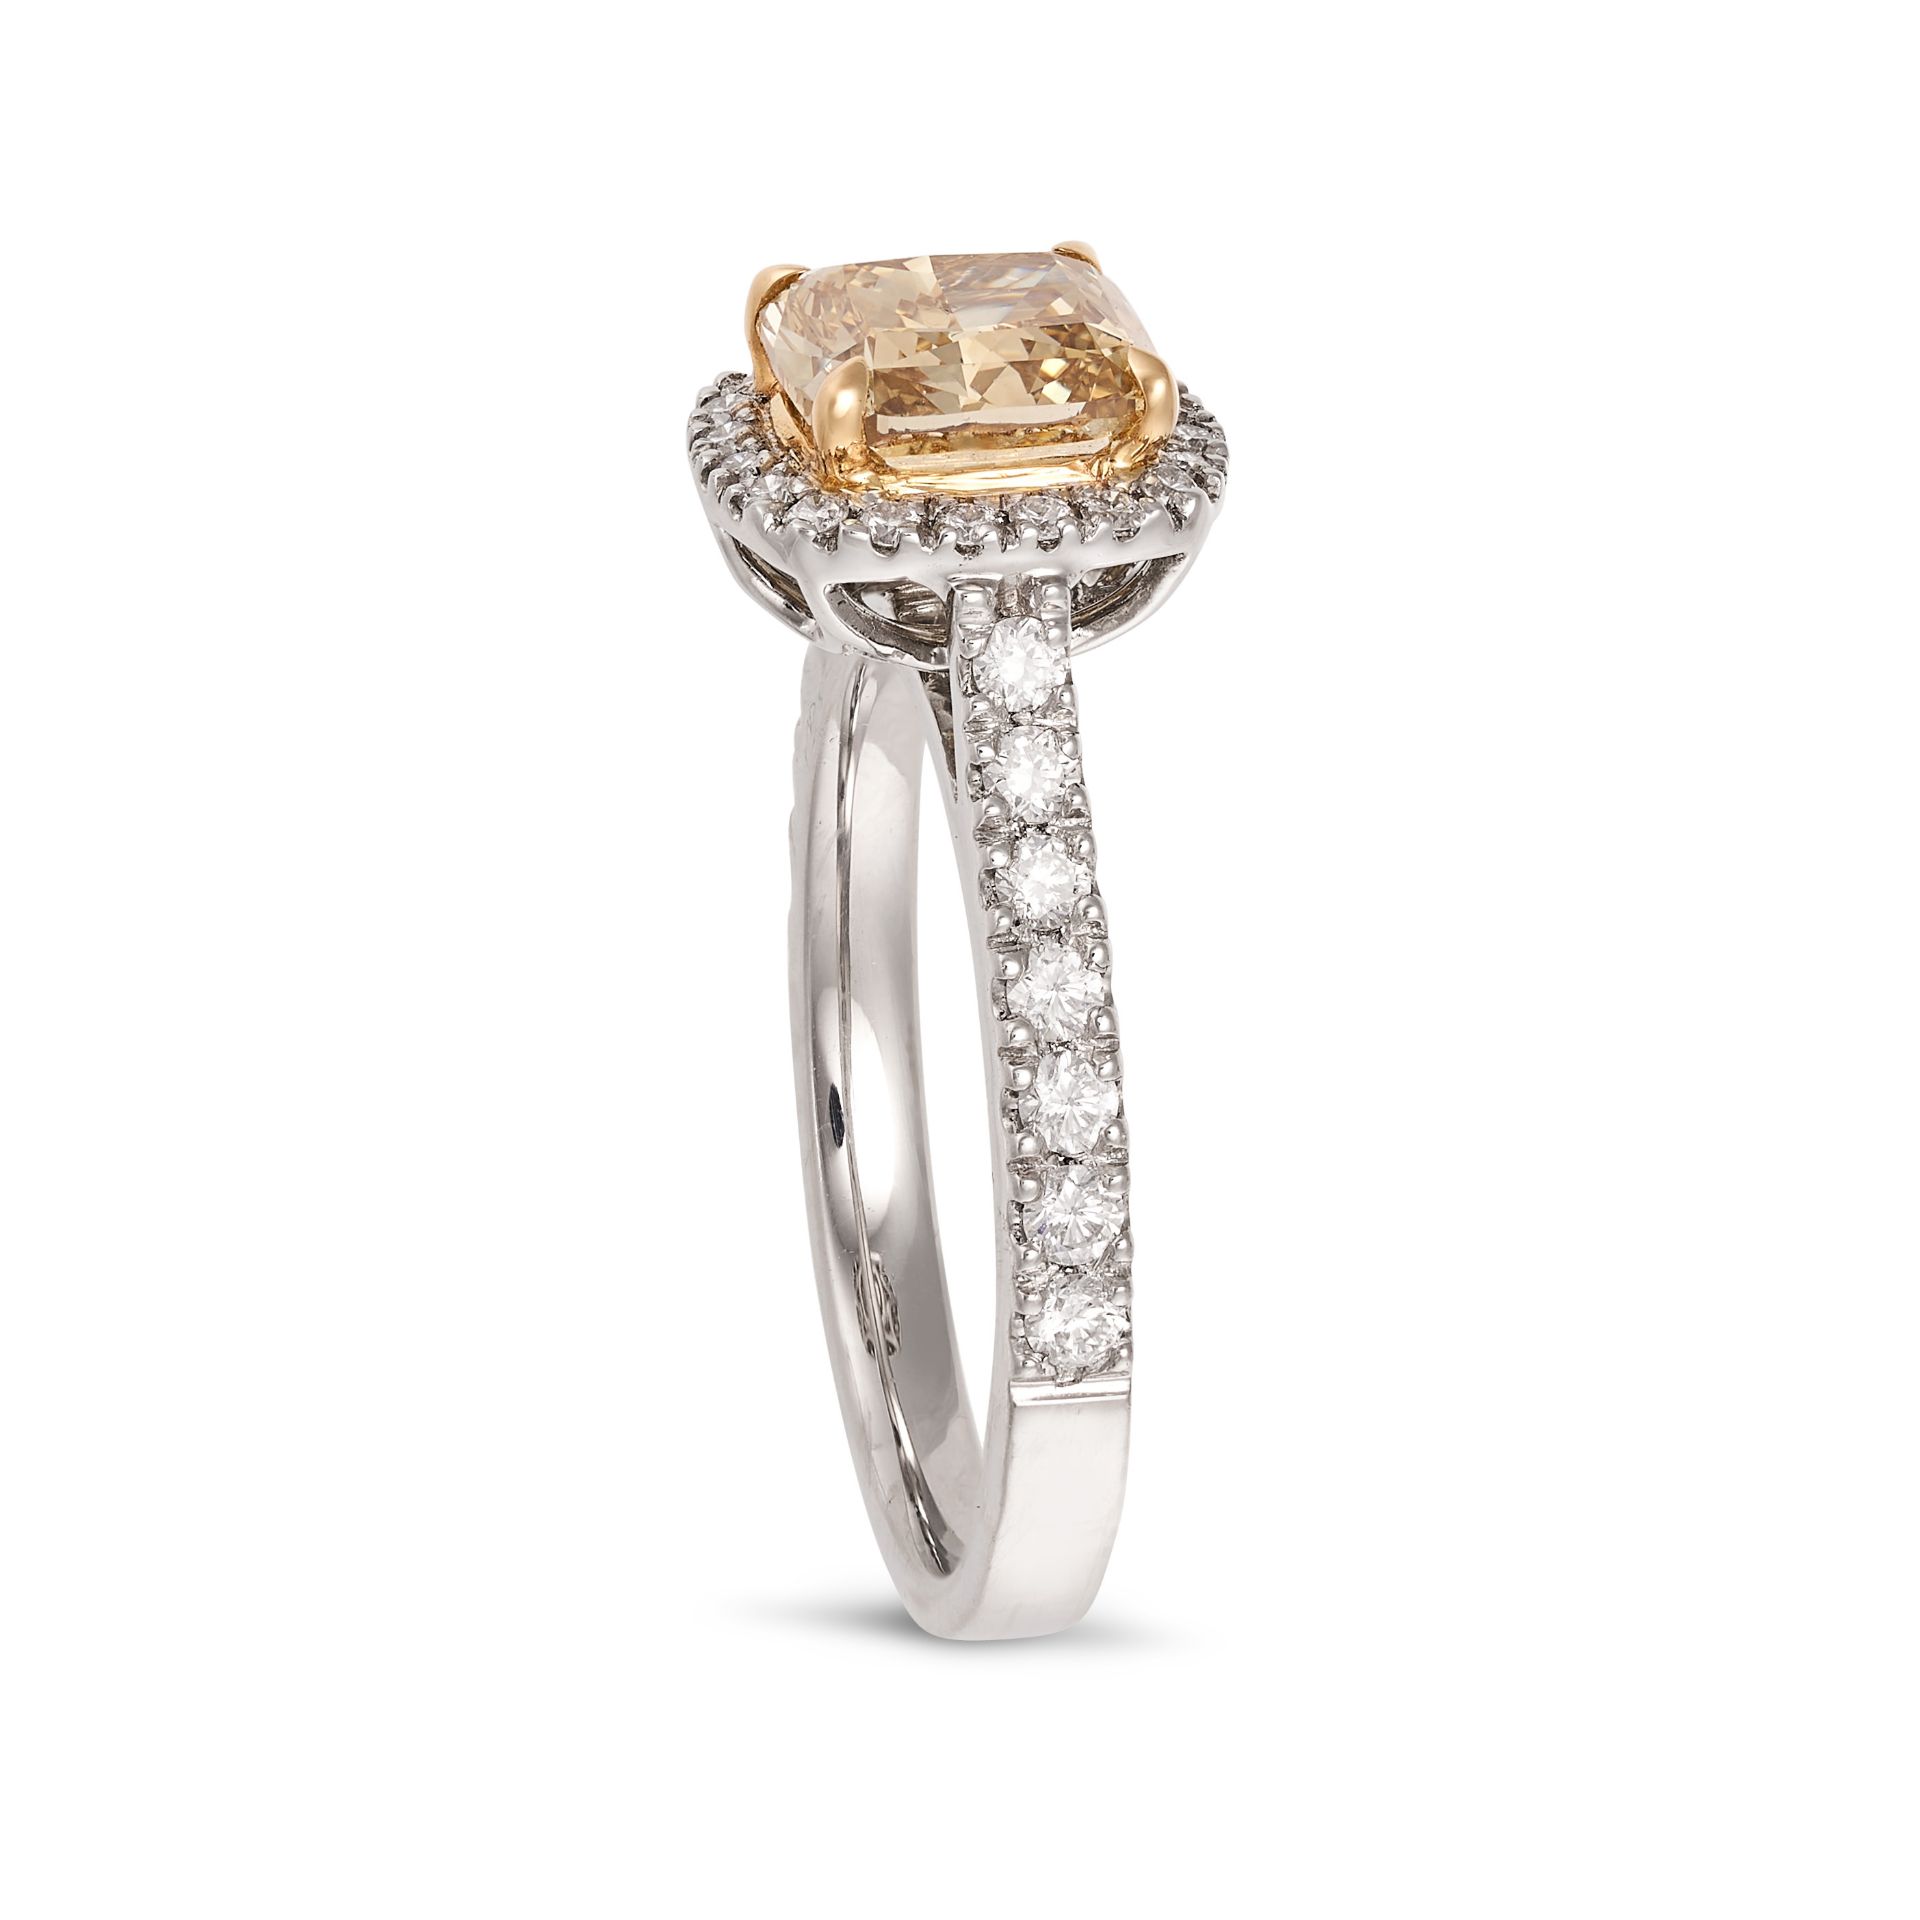 A YELLOW DIAMOND DRESS RING in platinum, set with a cushion cut yellow diamond of 1.90 carats in ... - Image 2 of 2